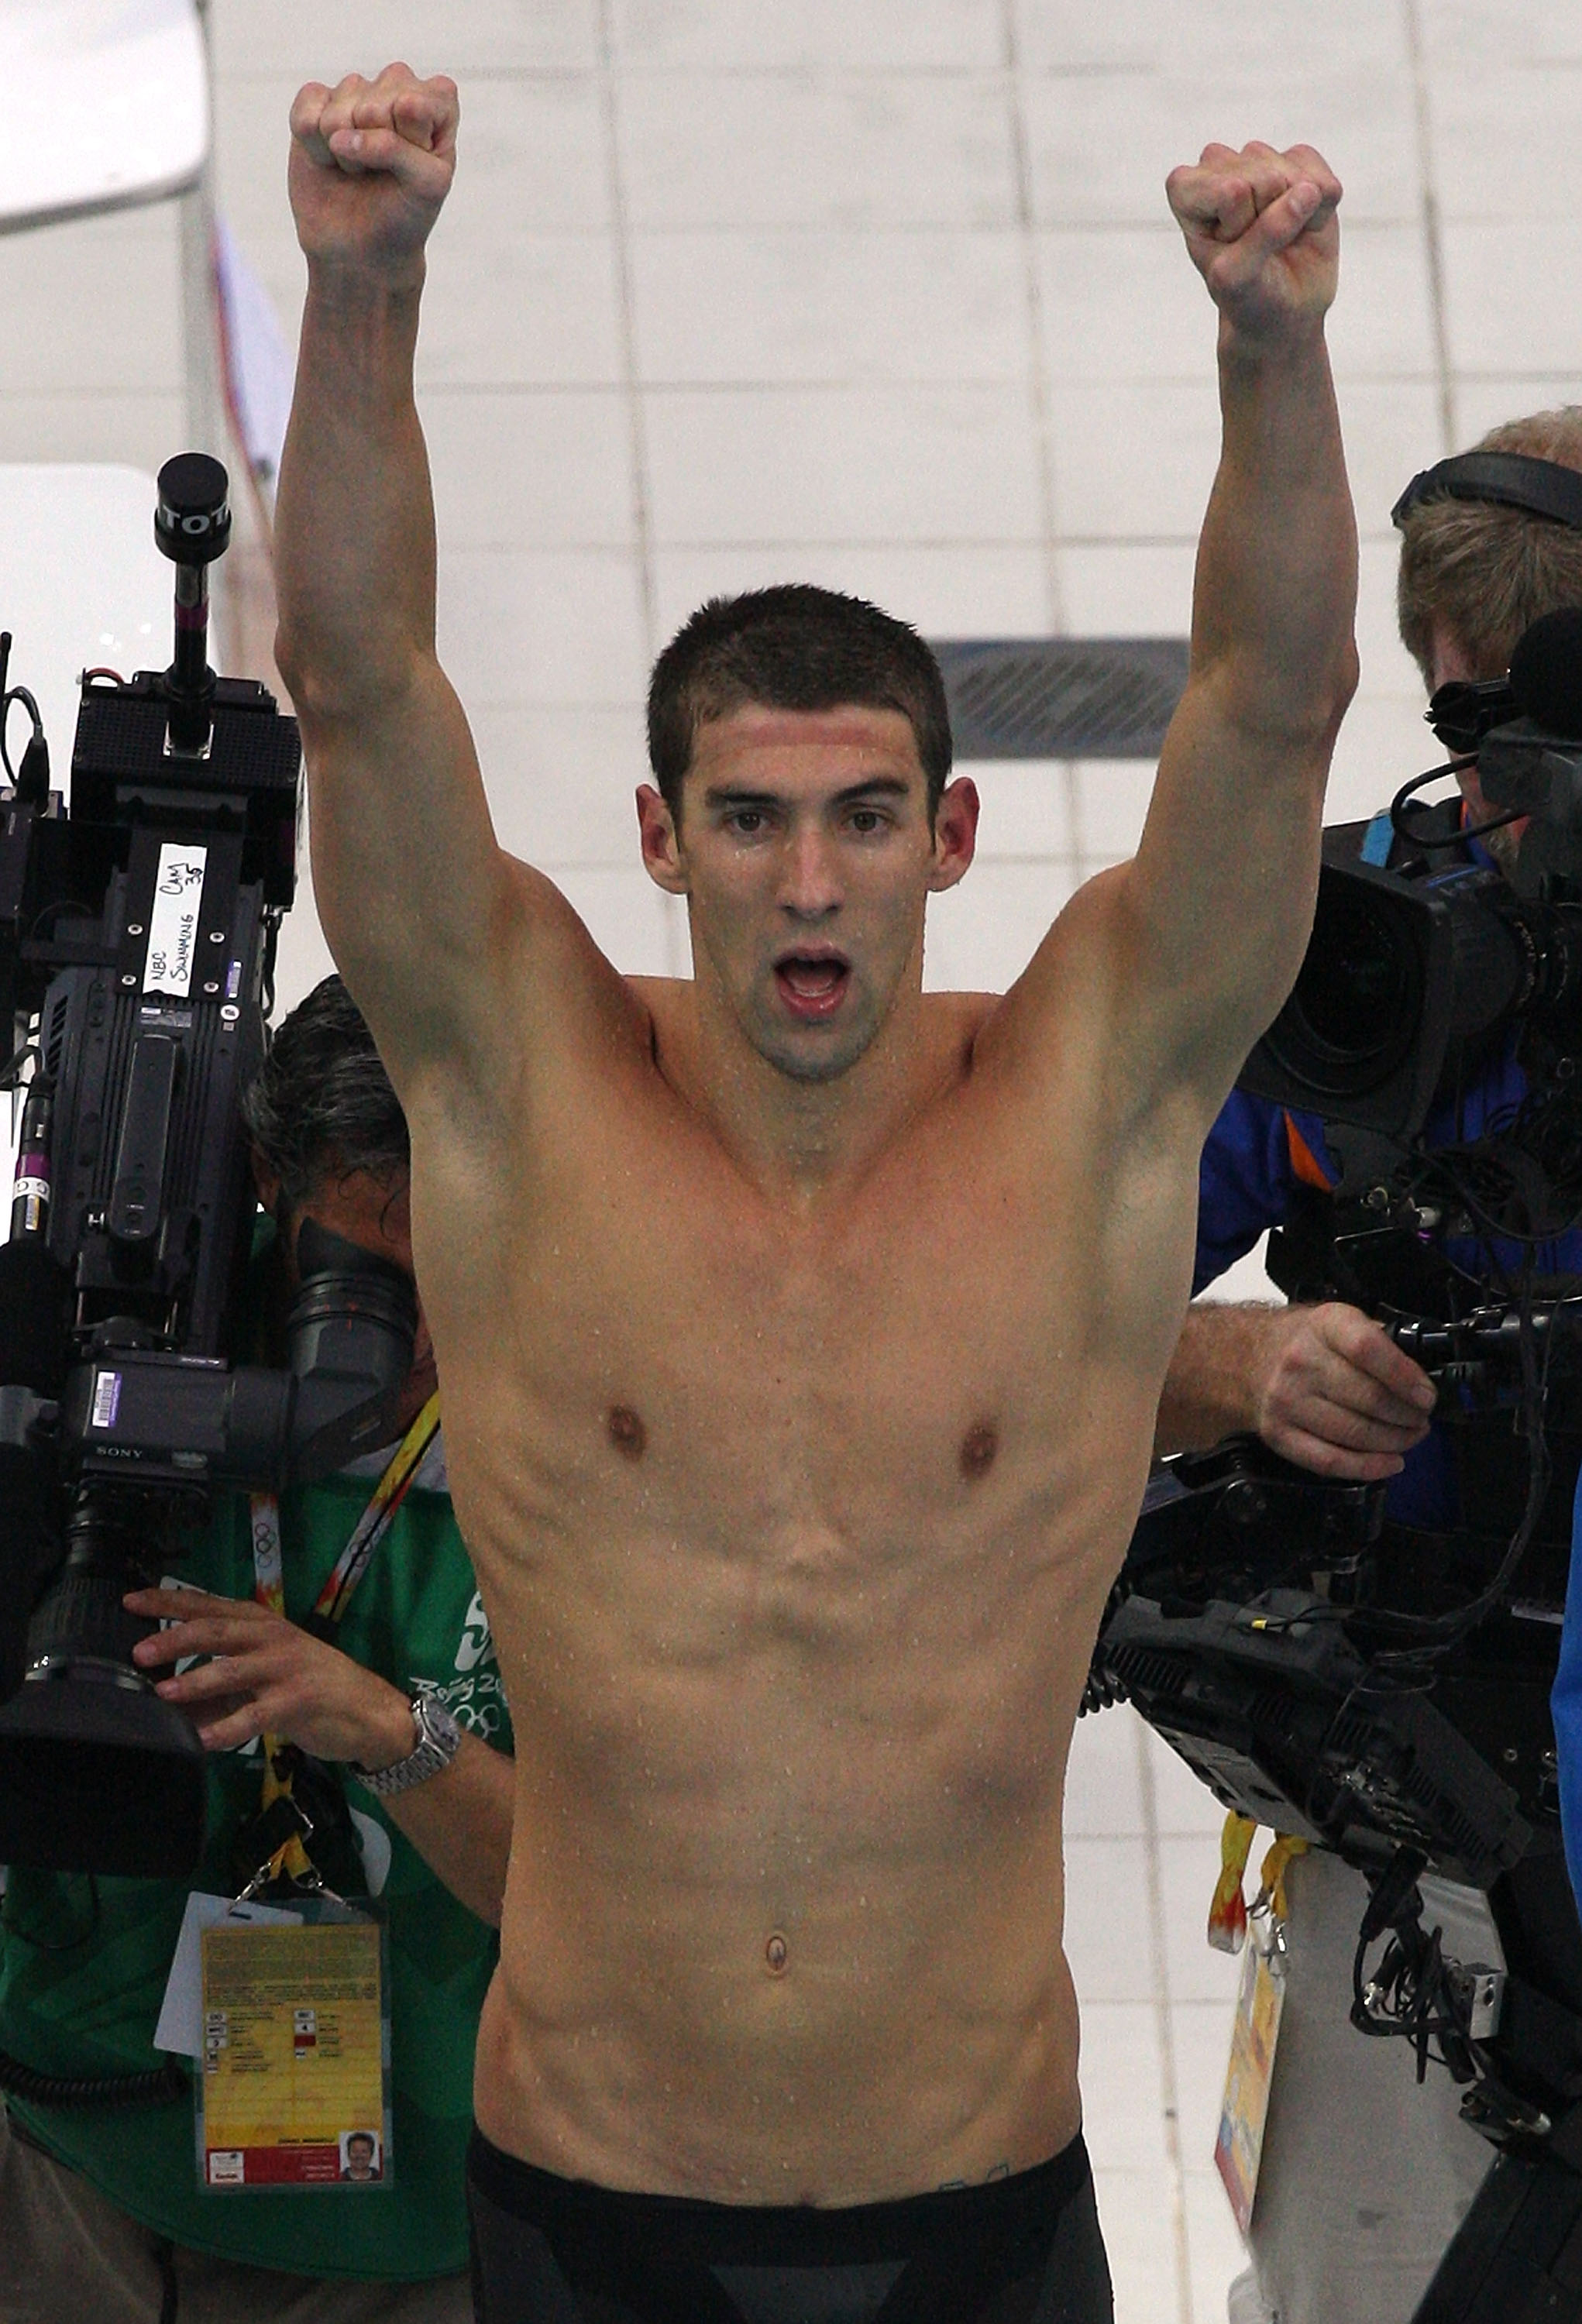 BEIJING - AUGUST 17:  Michael Phelps of the United States celebrates winning the Men's 4x100 Medley Relay with his team held at the National Aquatics Centre during Day 9 of the Beijing 2008 Olympic Games on August 17, 2008 in Beijing, China.  The United S